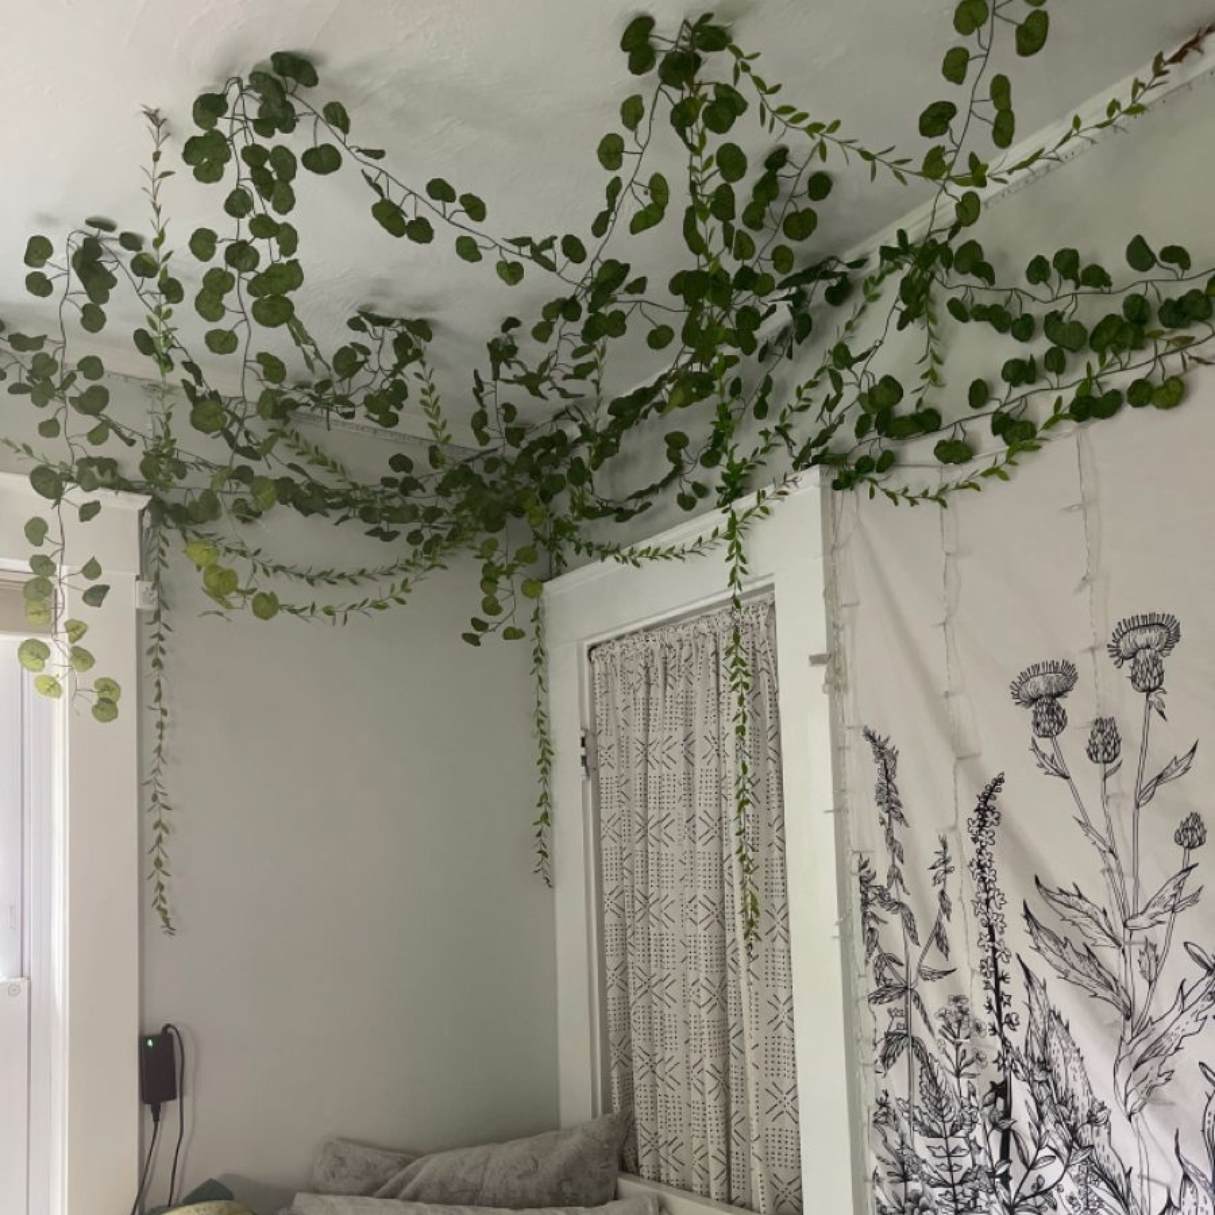 How To Hang Vines From The Ceiling